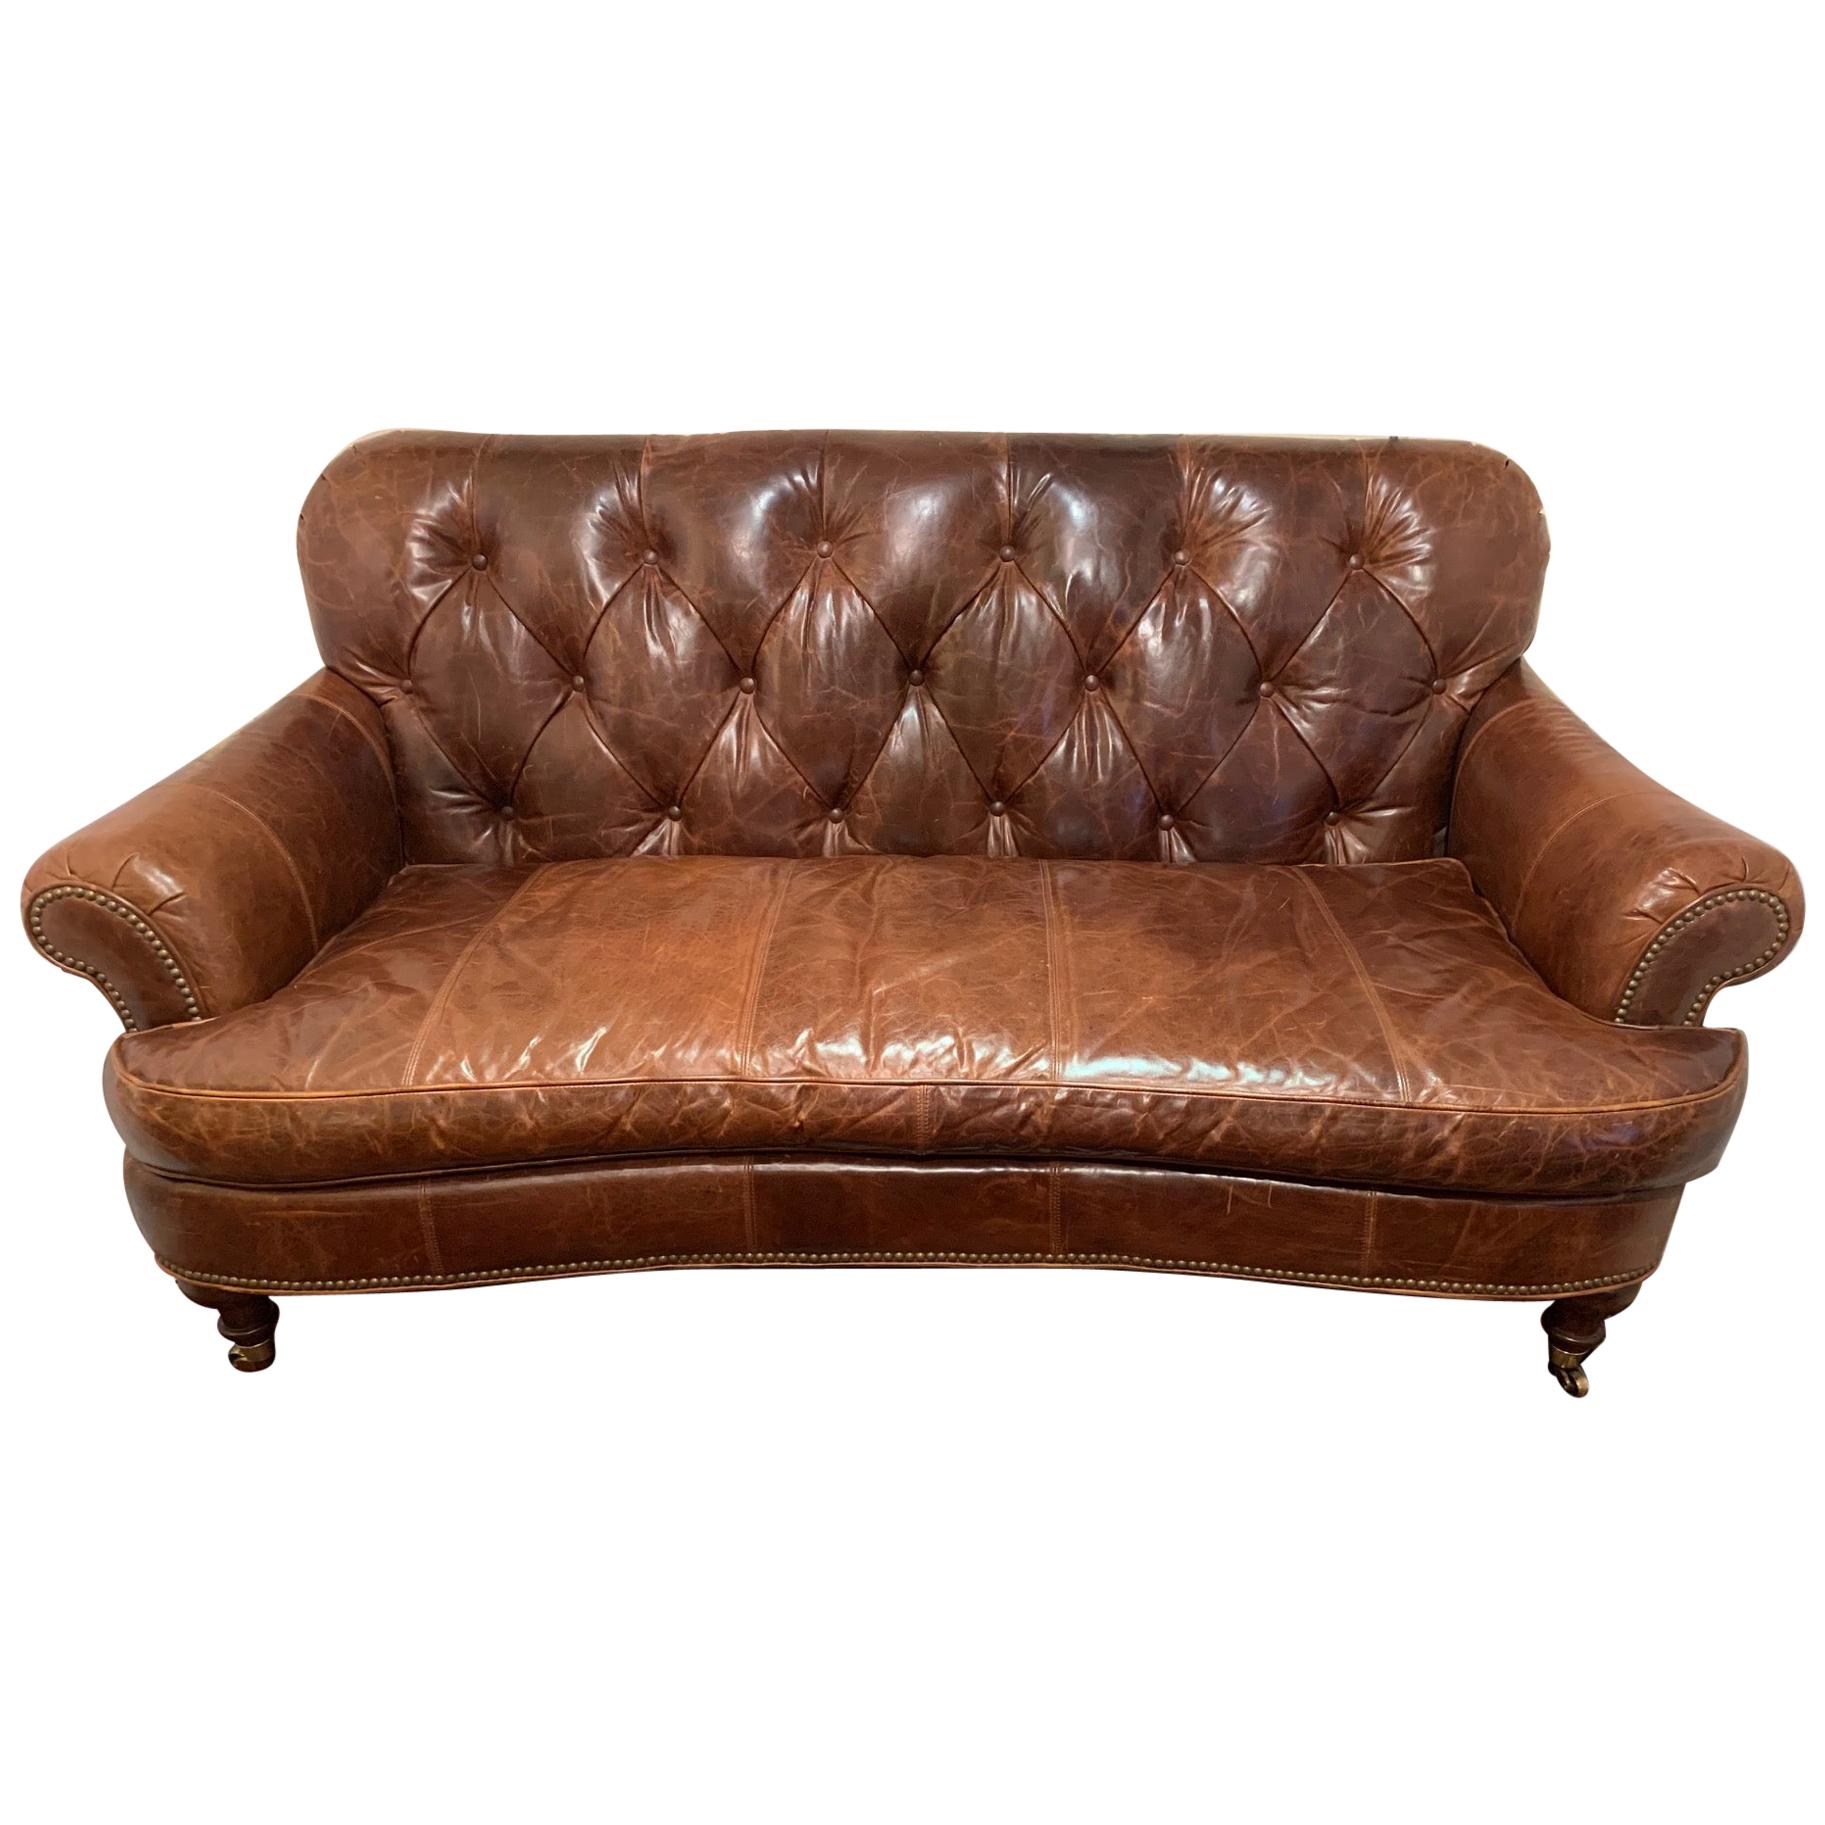 Delicious Supple Tufted Brown Leather Settee Loveseat